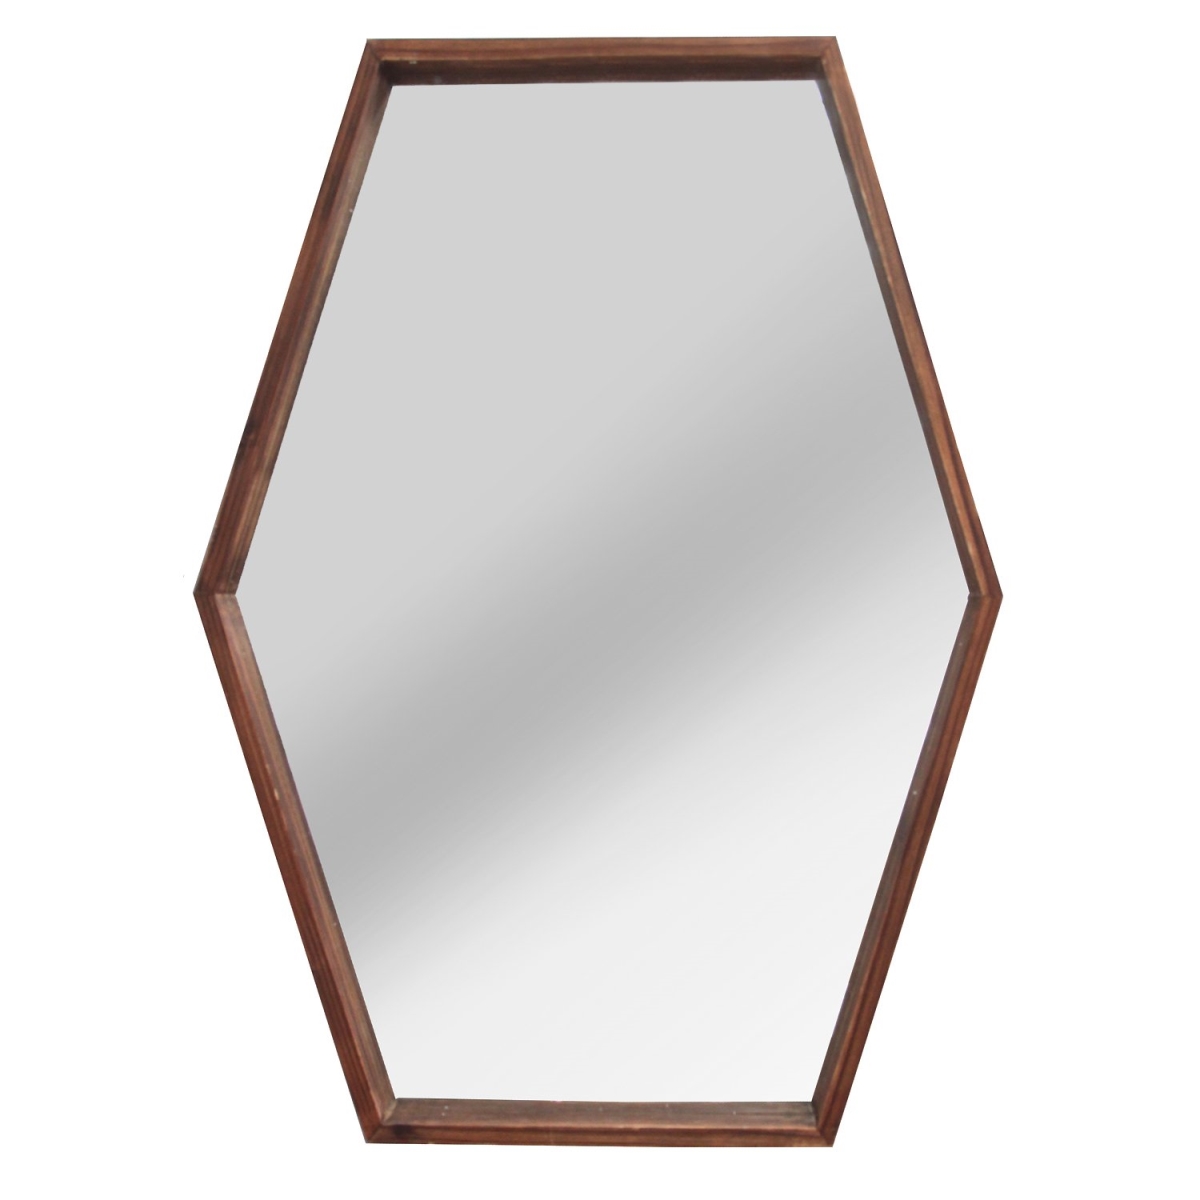 Home Roots 321306 Handcrafted Wood Mirror With Decorative Frame